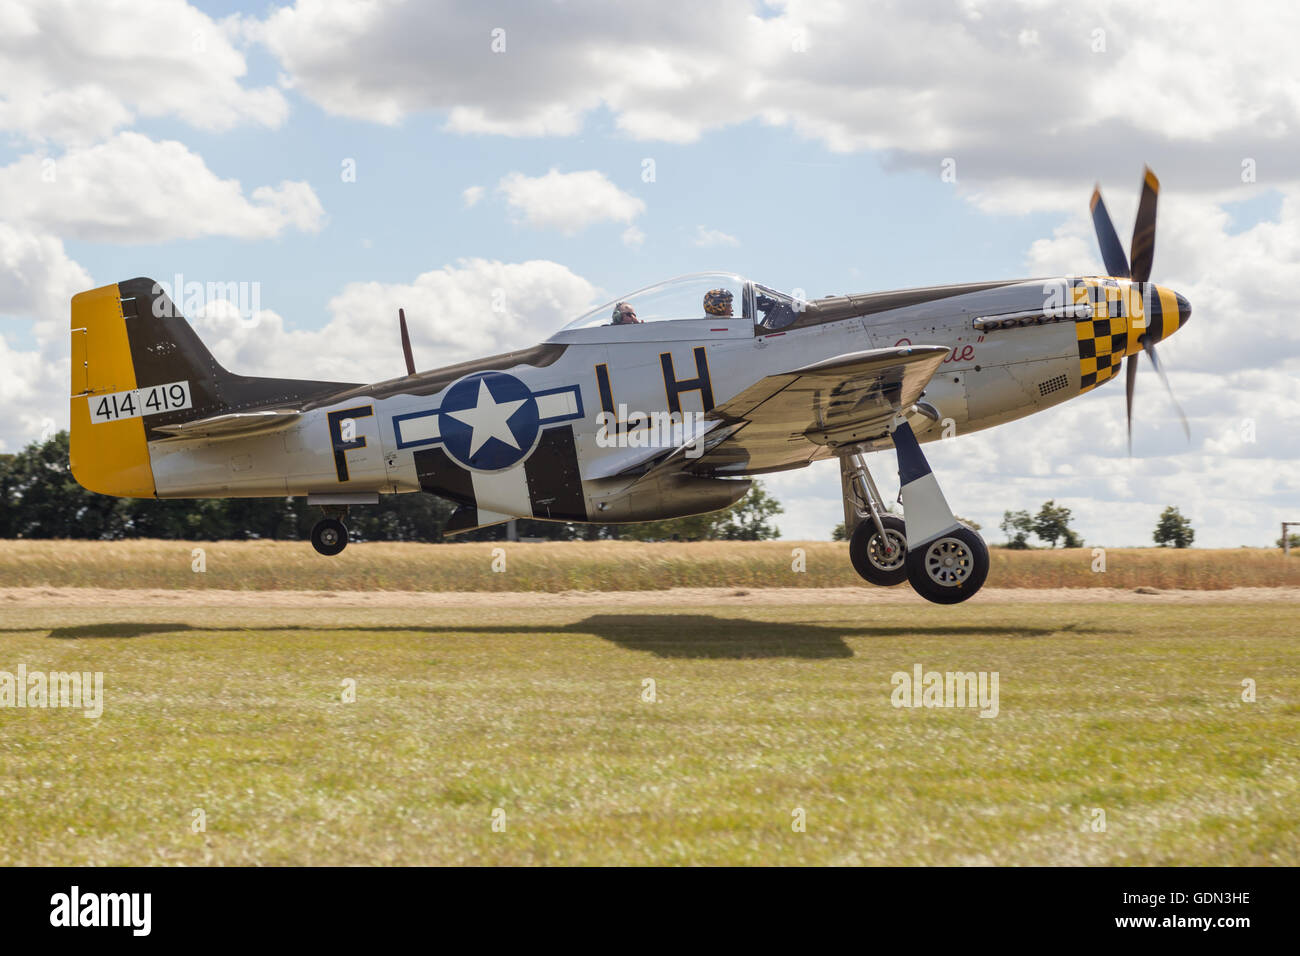 Restored airworthy P-51D Mustang American fighter aeroplane taking off at the hardwick warbirds janie which has since been wrecked in a crash Stock Photo